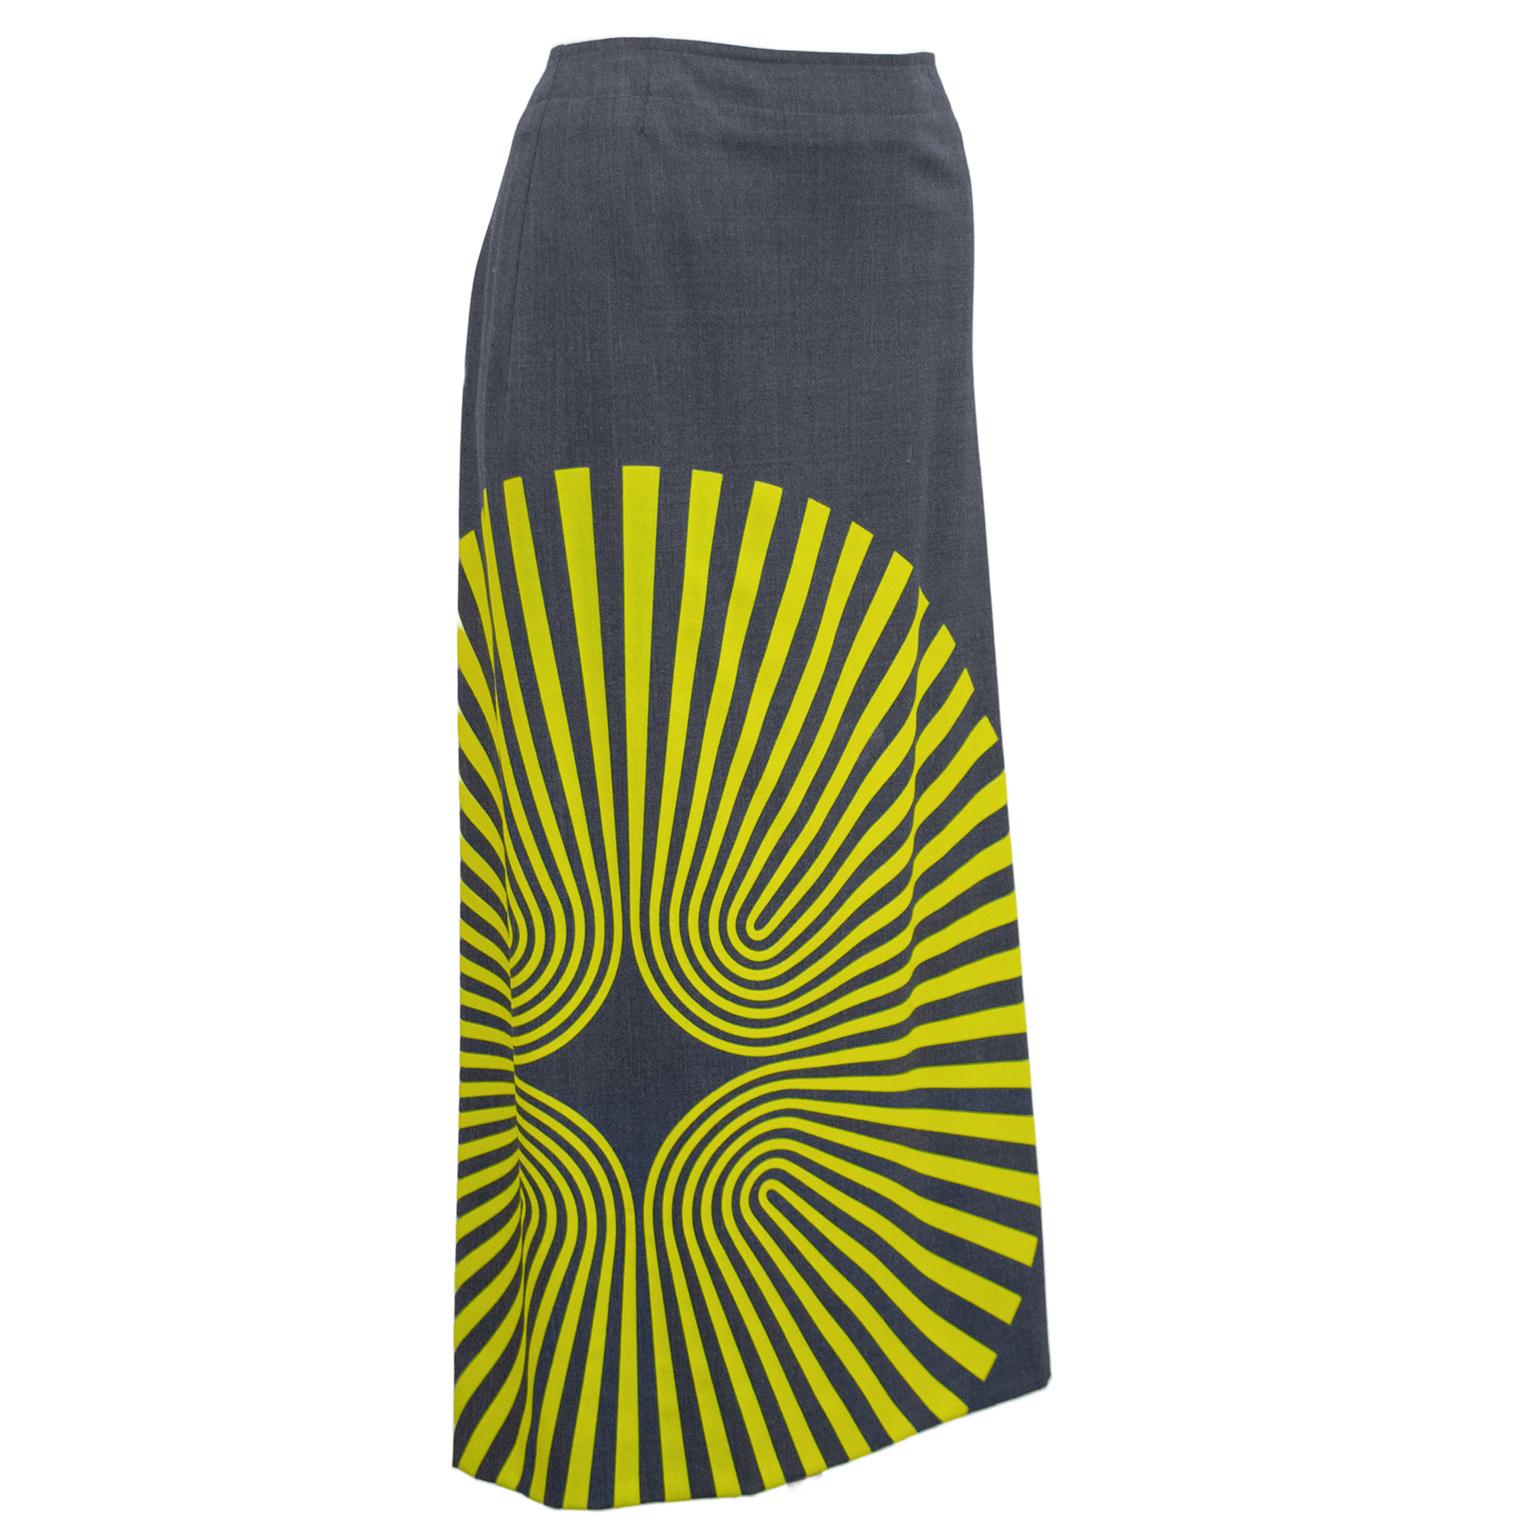 Grey wool Dries Van Noten Fall 2014 pencil skirt with overprinted yellow spiral pattern. Eye catching yet simple in its construction. Works well with any top. Exposed oversewn fastener with metal oversized zipper lines up with the left back hip, 